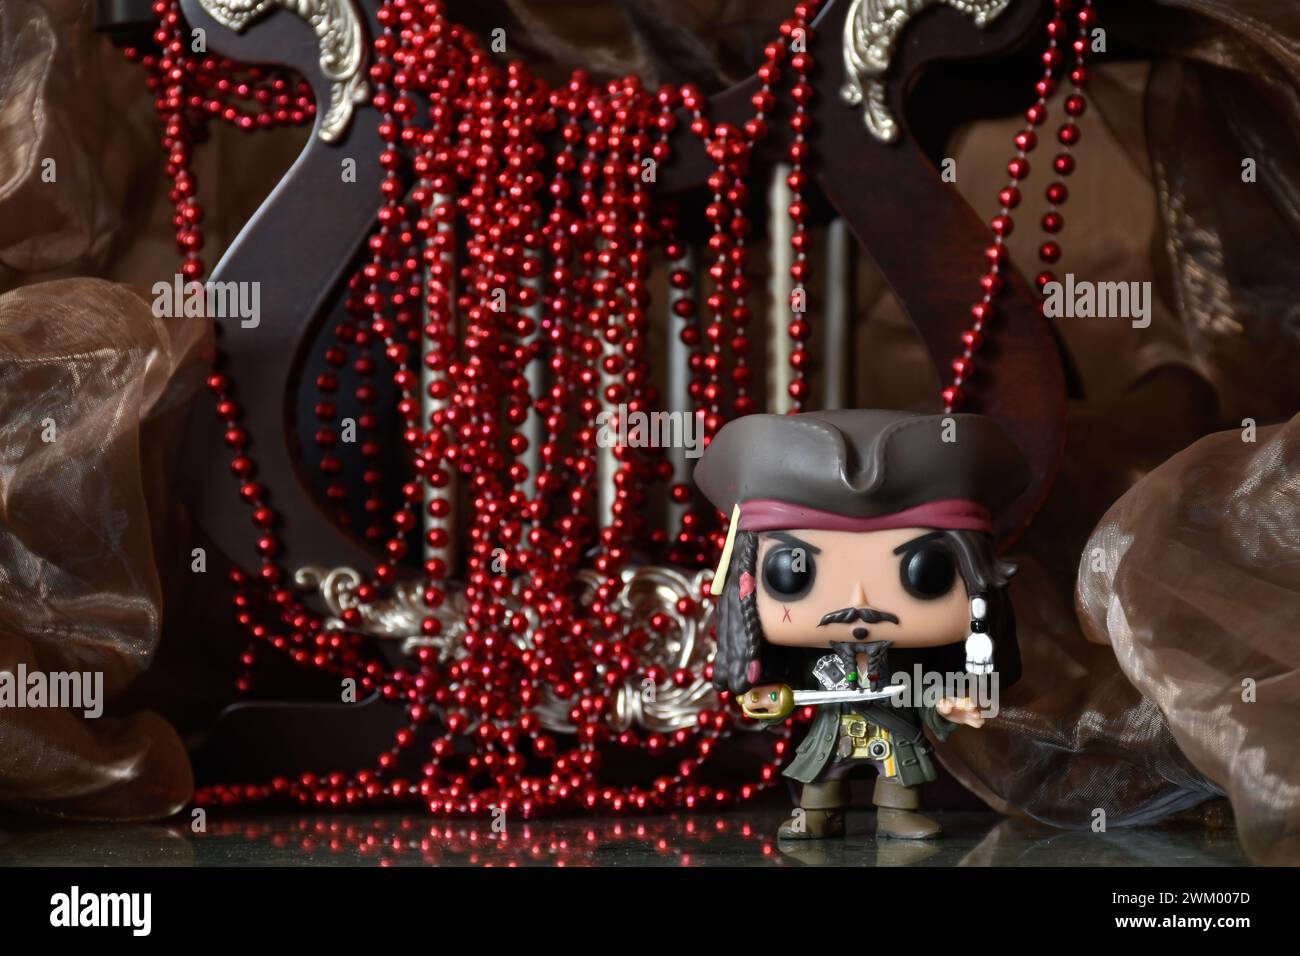 Funko Pop action figure of captain Jack Sparrow from movie Pirates of the Caribbean. Treasure, red necklace, cocked hat, sword, cave, dark palace. Stock Photo